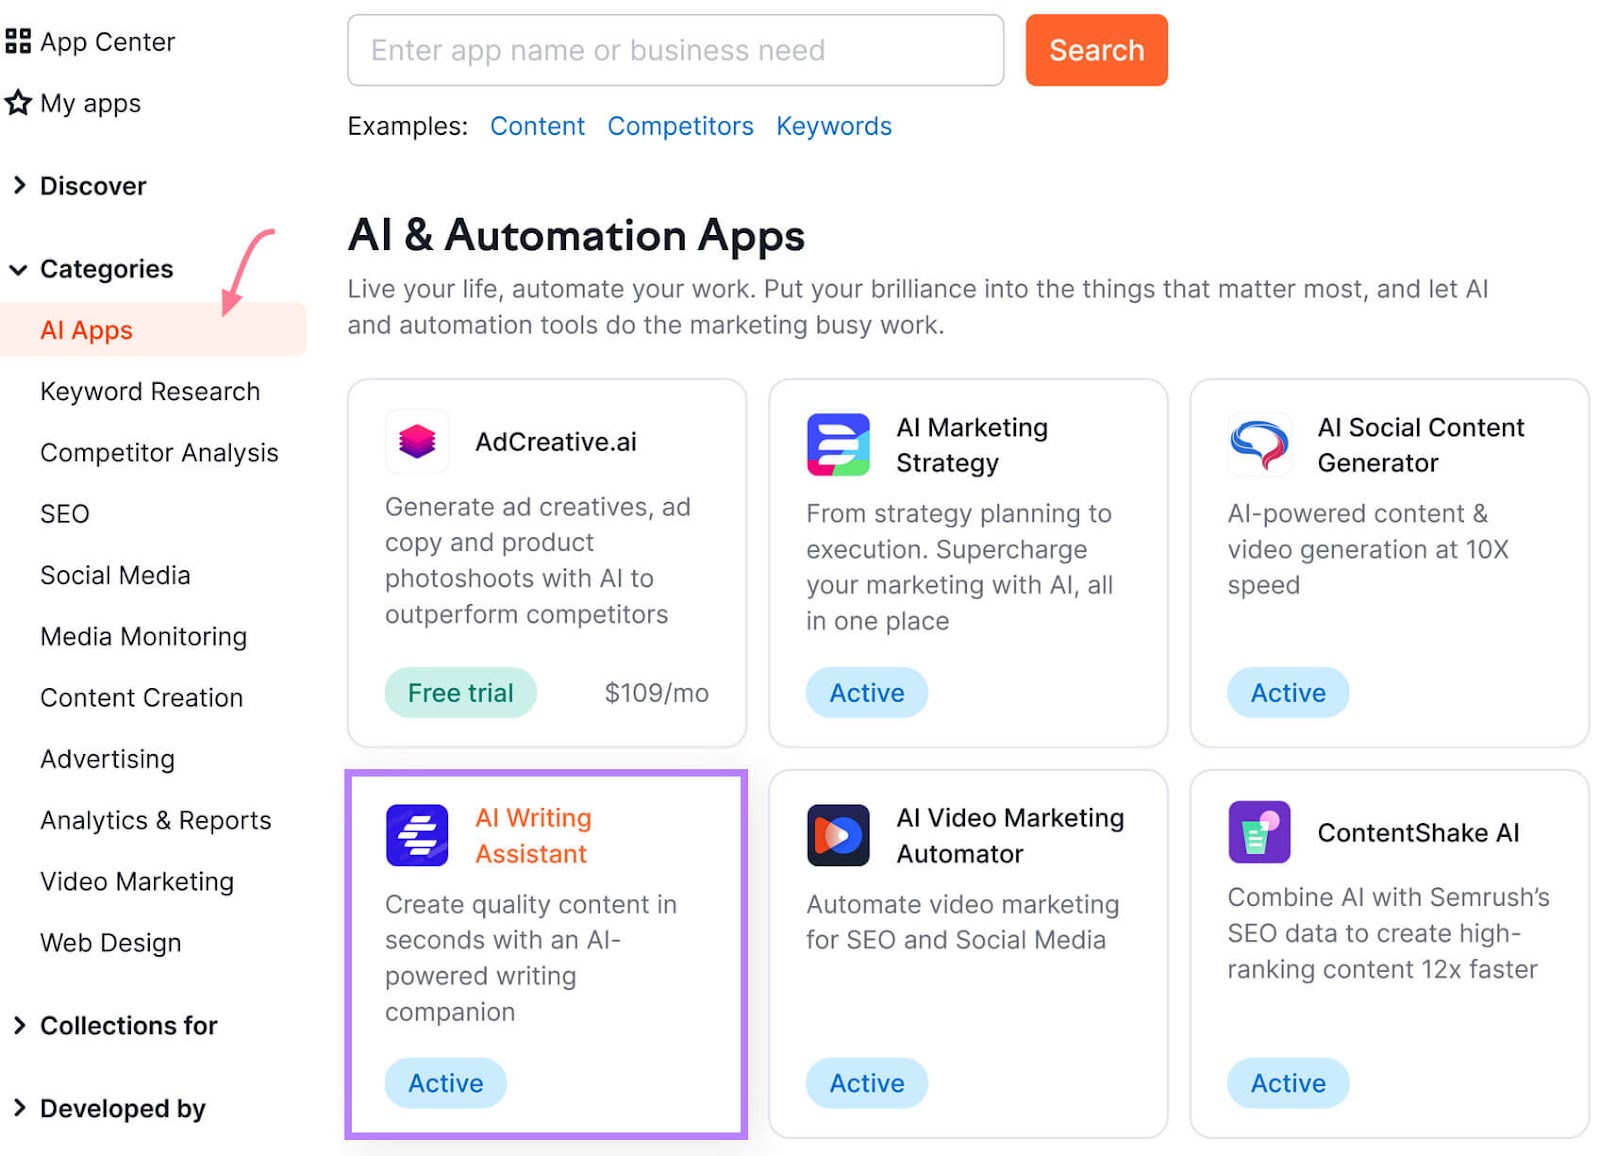 Semrush App Center interface focused on "AI & Automation Apps," with the option "AI Writing Assistant" highlighted.